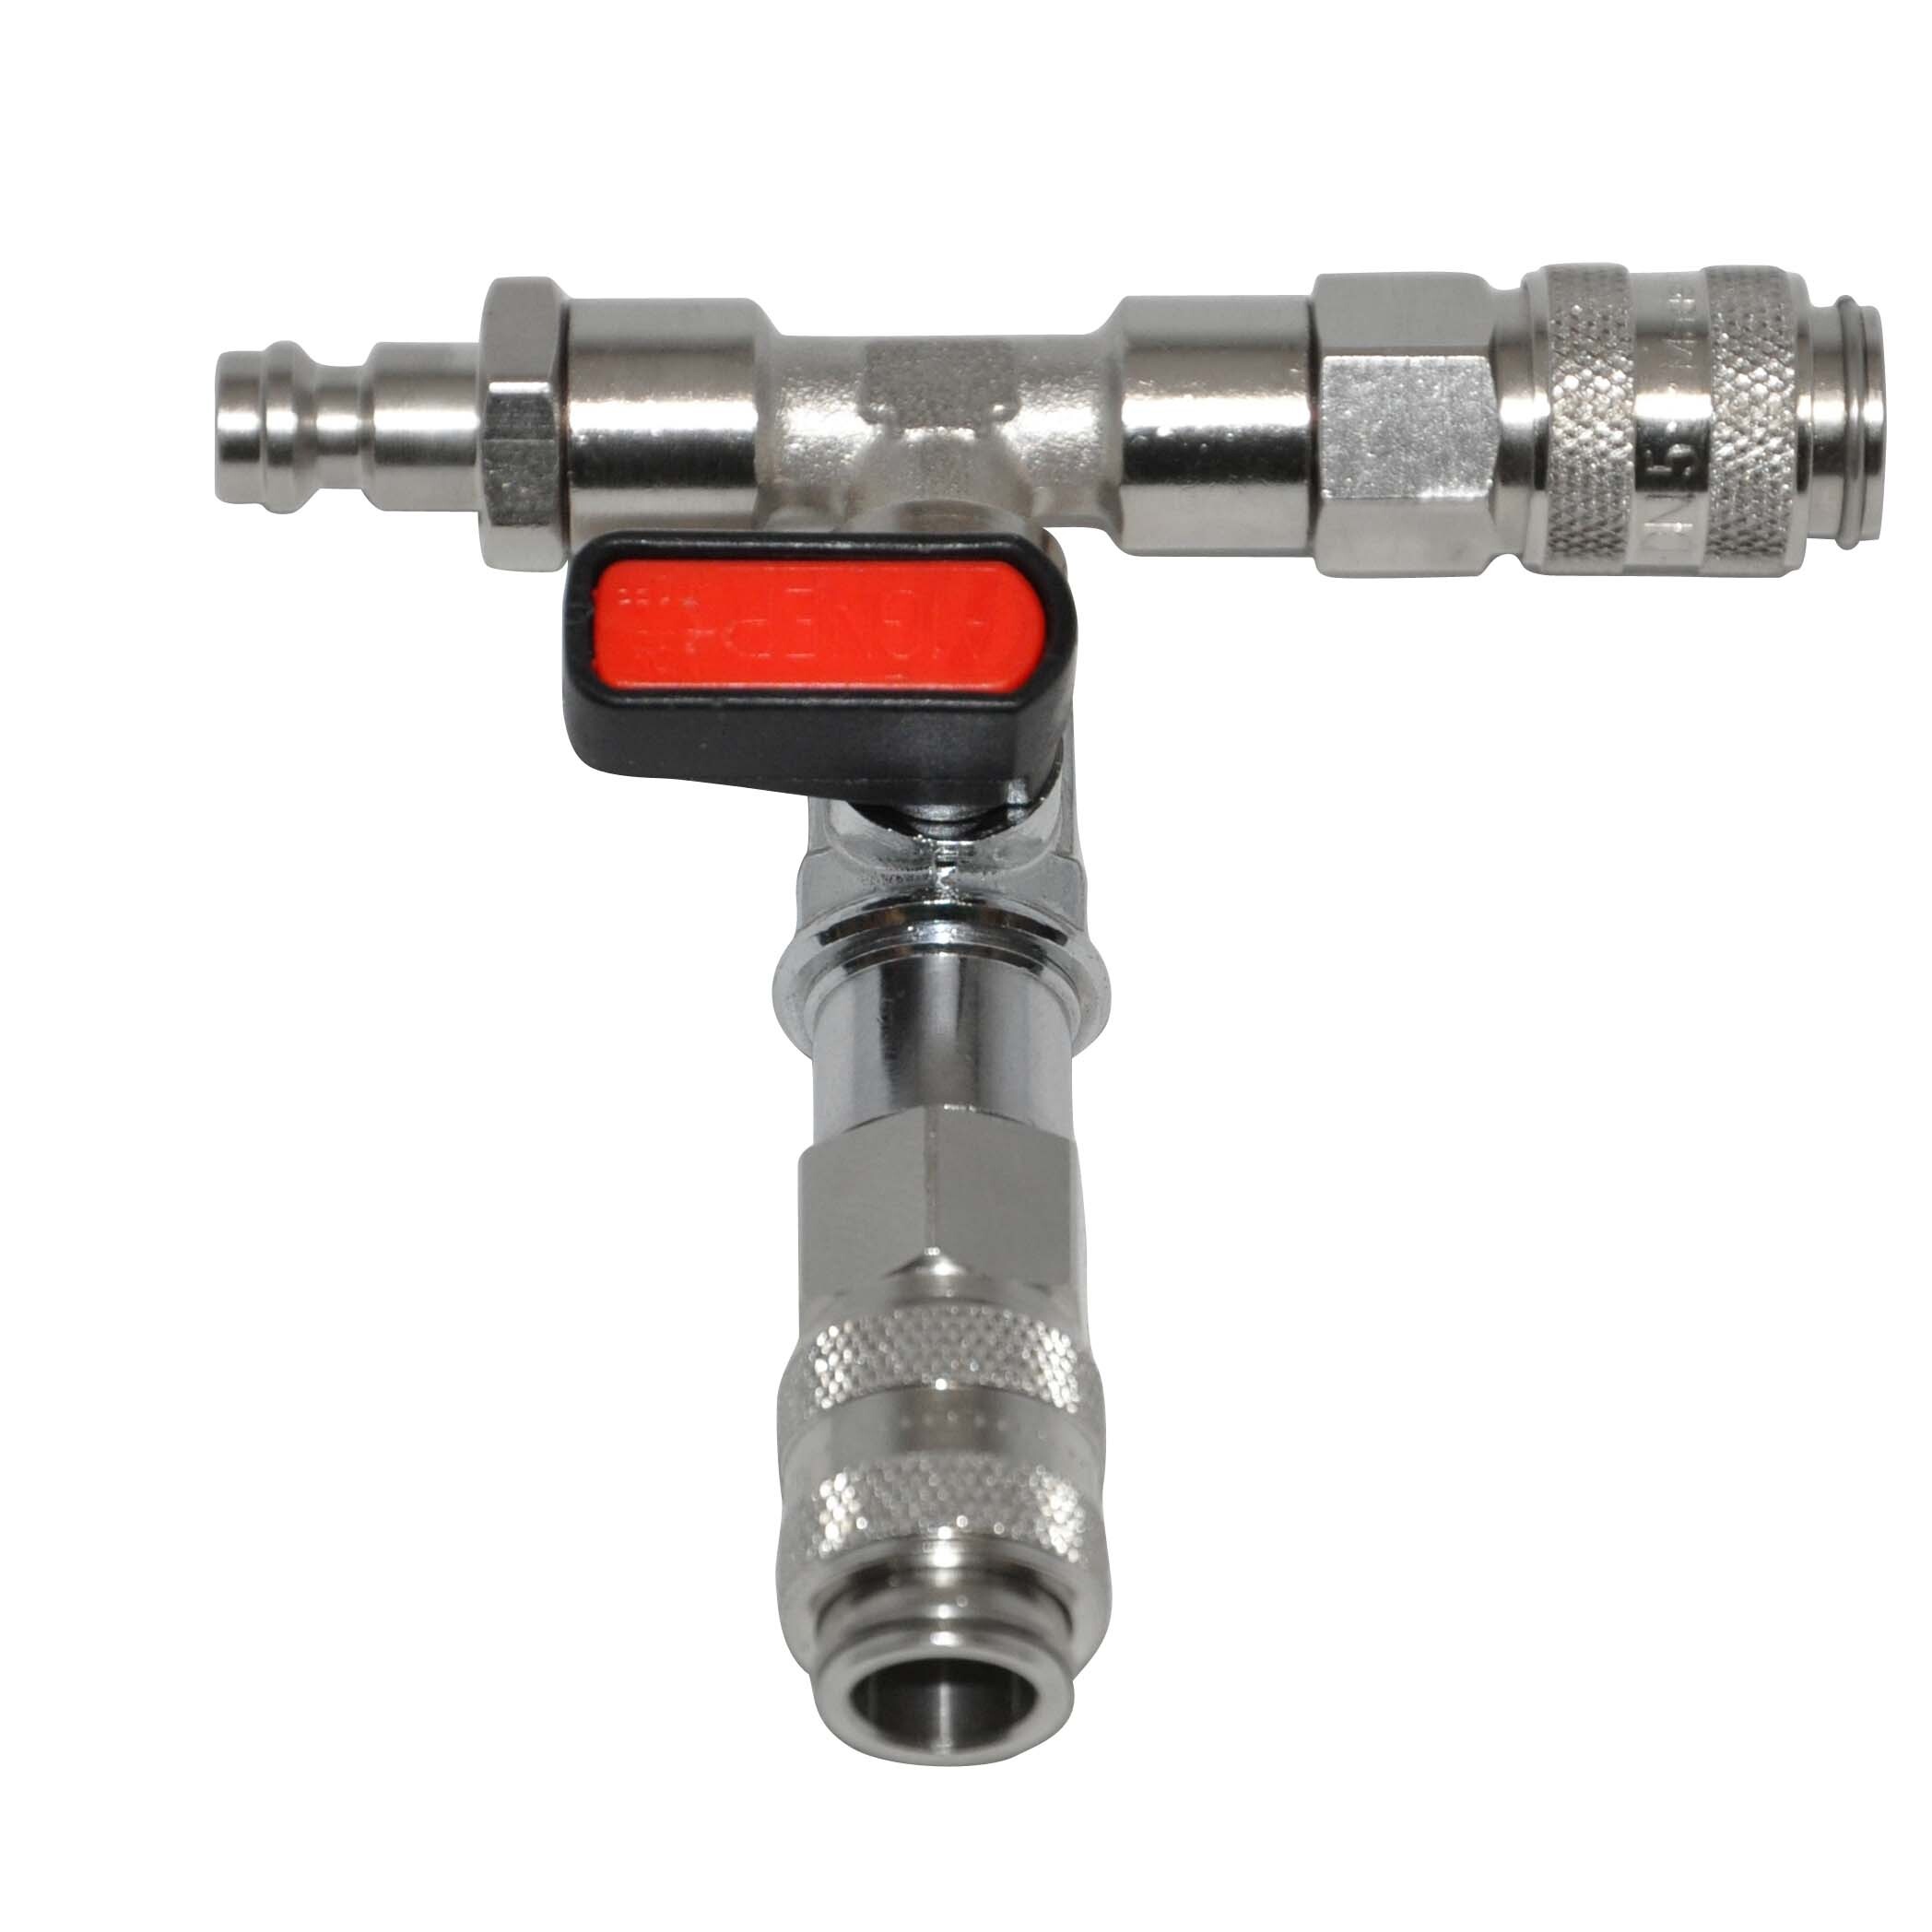 Adaptor t-fitting serie 21 with ball v